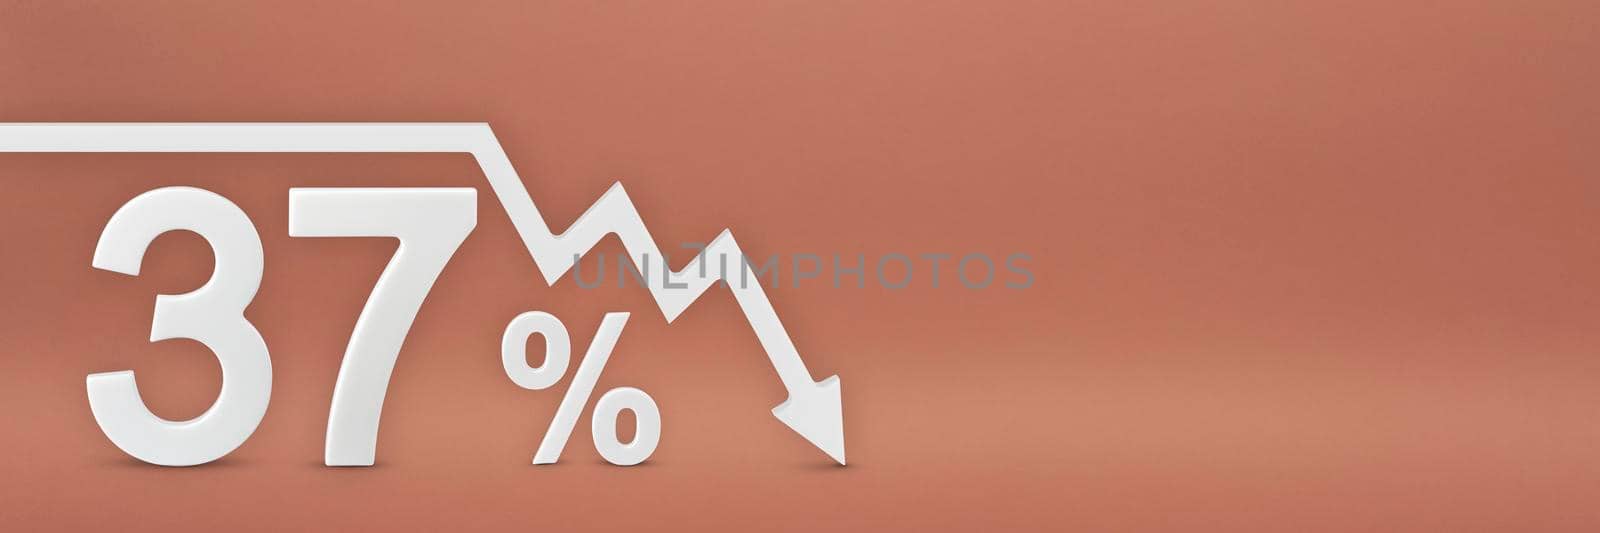 thirty-seven percent, the arrow on the graph is pointing down. Stock market crash, bear market, inflation.Economic collapse, collapse of stocks.3d banner,37 percent discount sign on a red background. by SERSOL